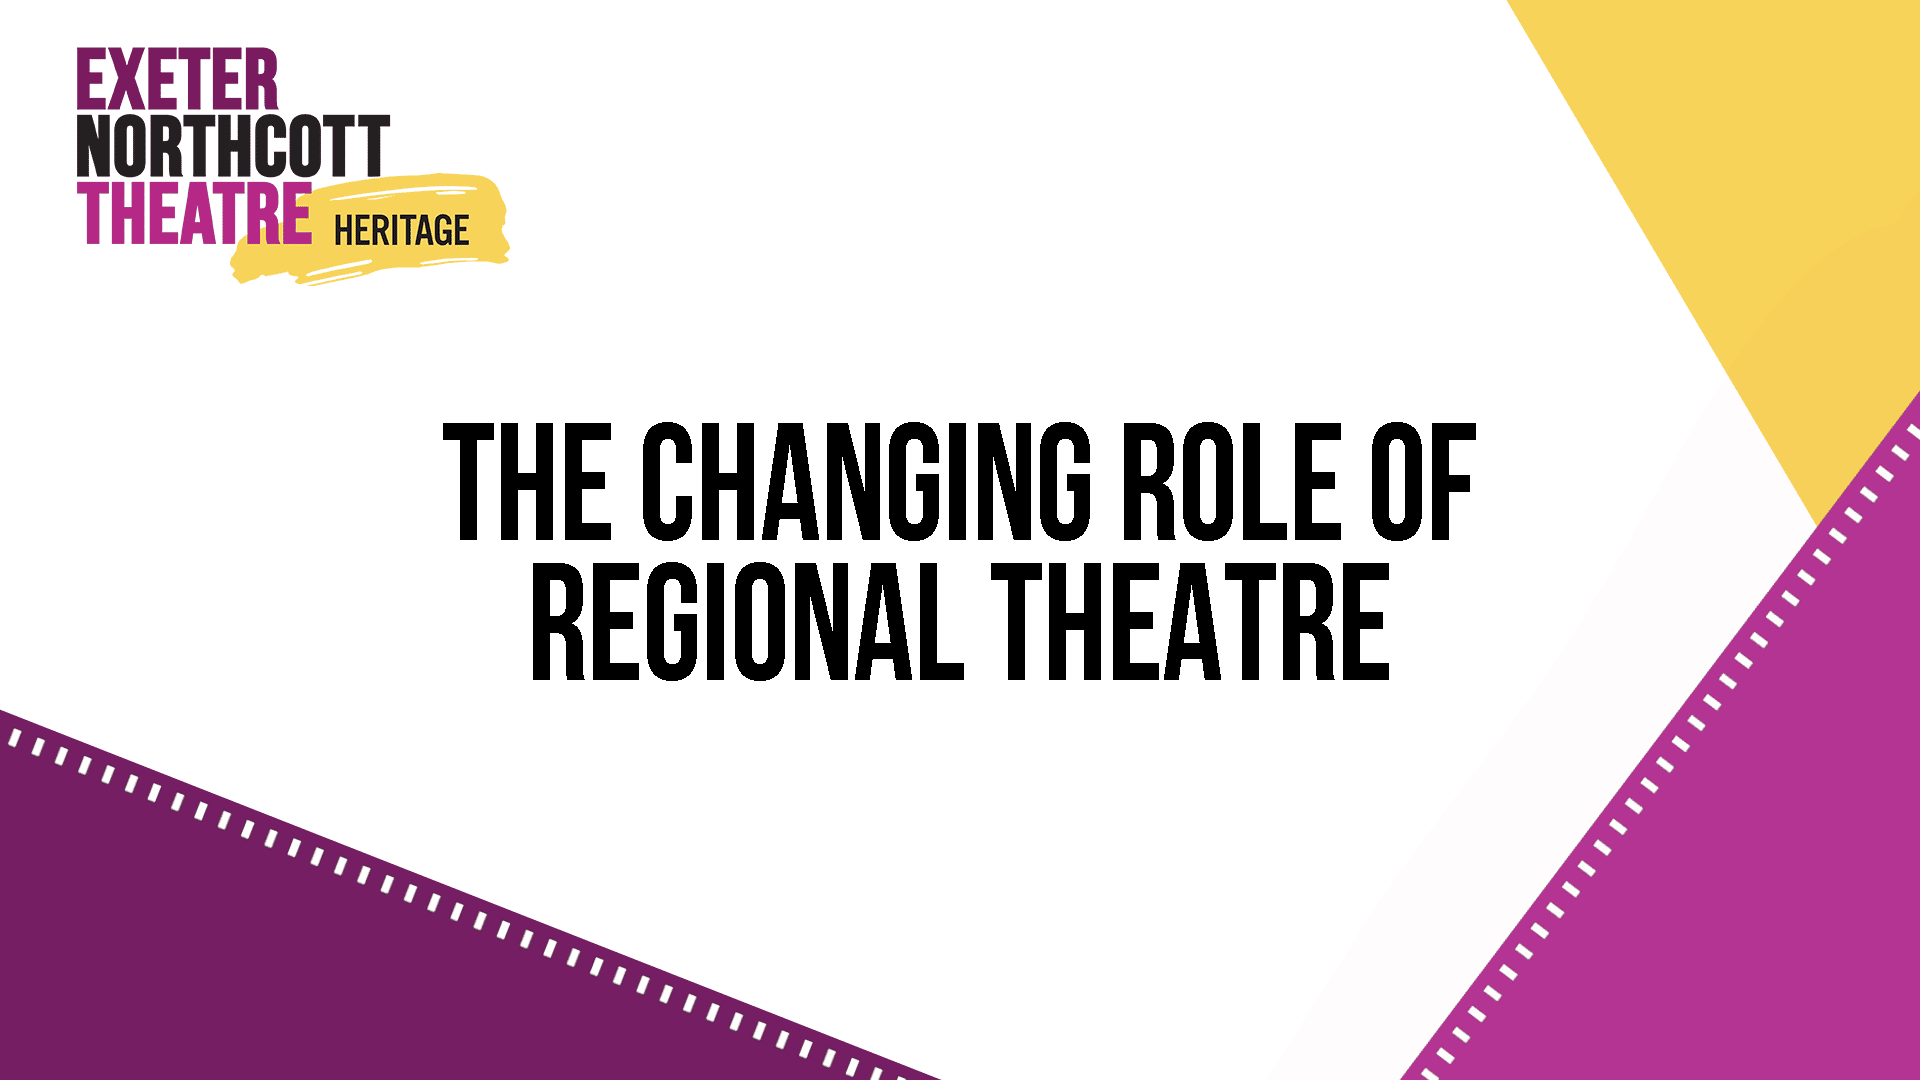 Heritage Talk: The Changing Role of Regional Theatre